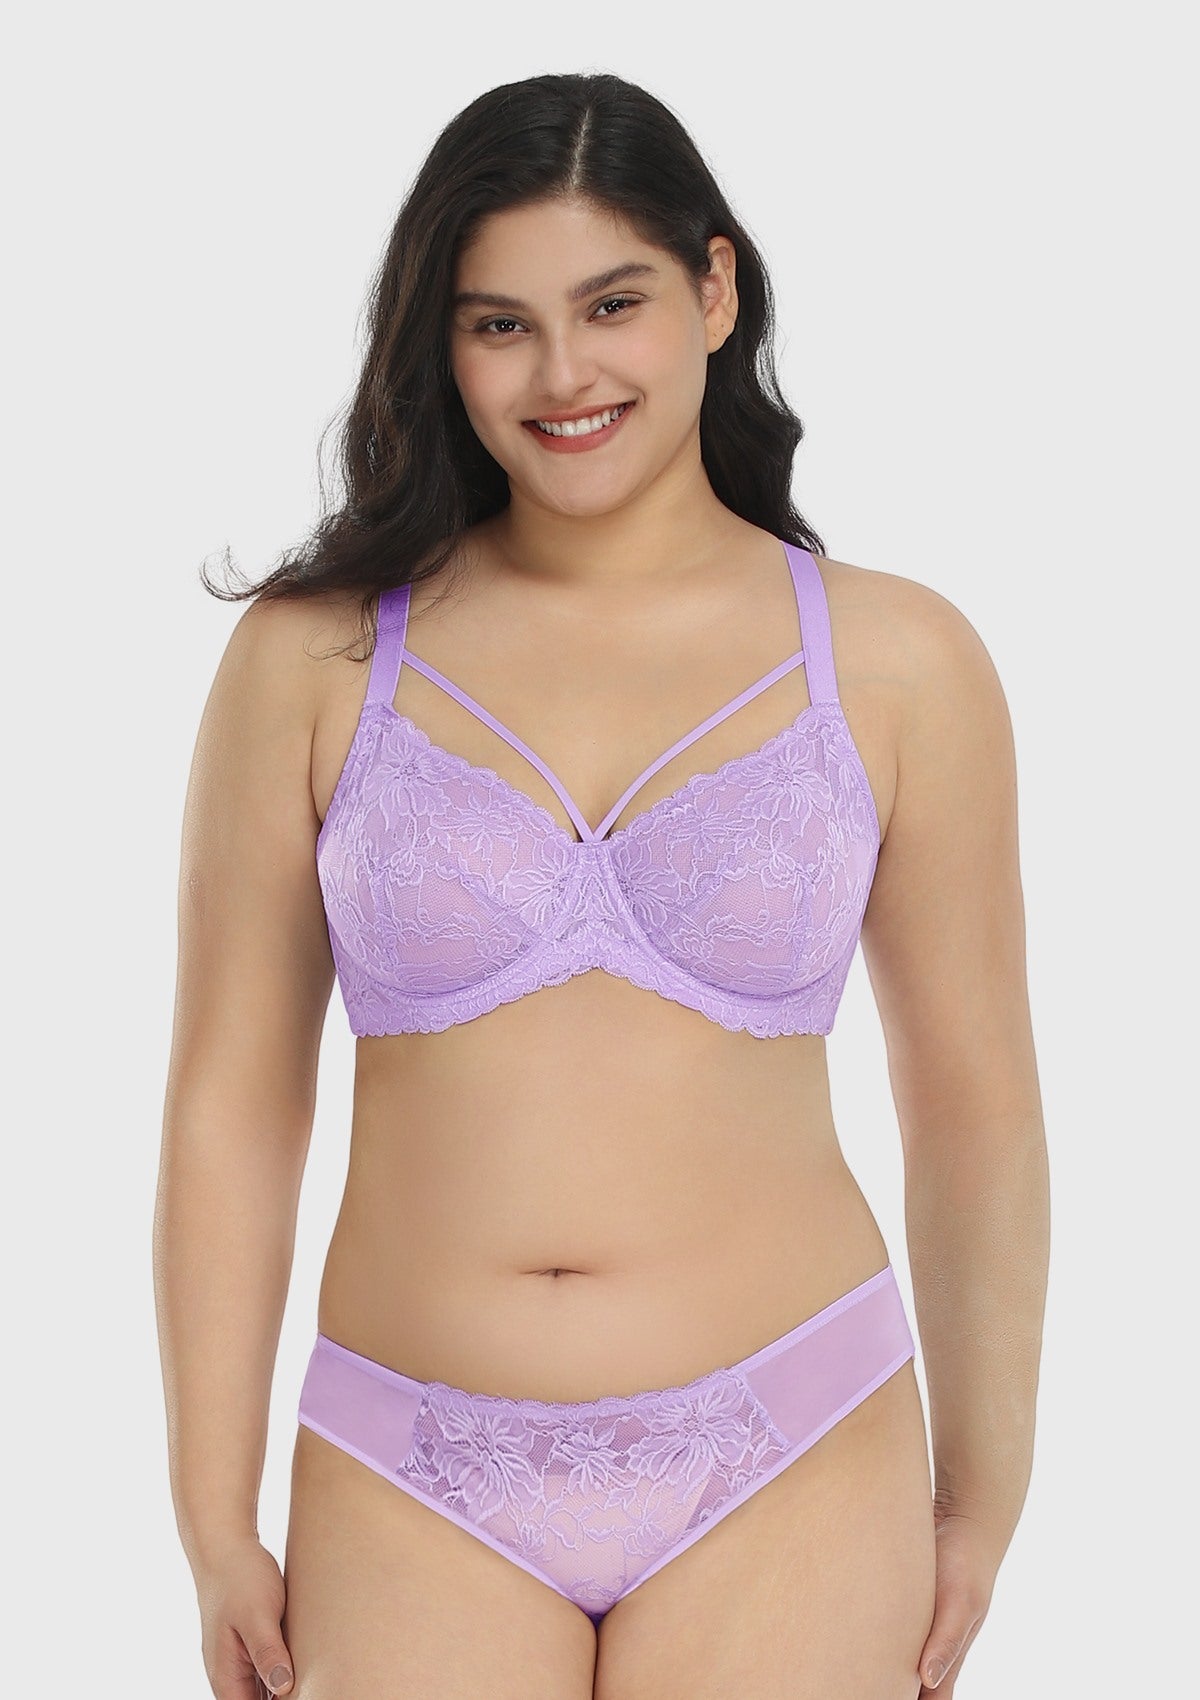 HSIA Pretty In Petals See-Through Lace Bra: Lift And Separate - Purple / 34 / C